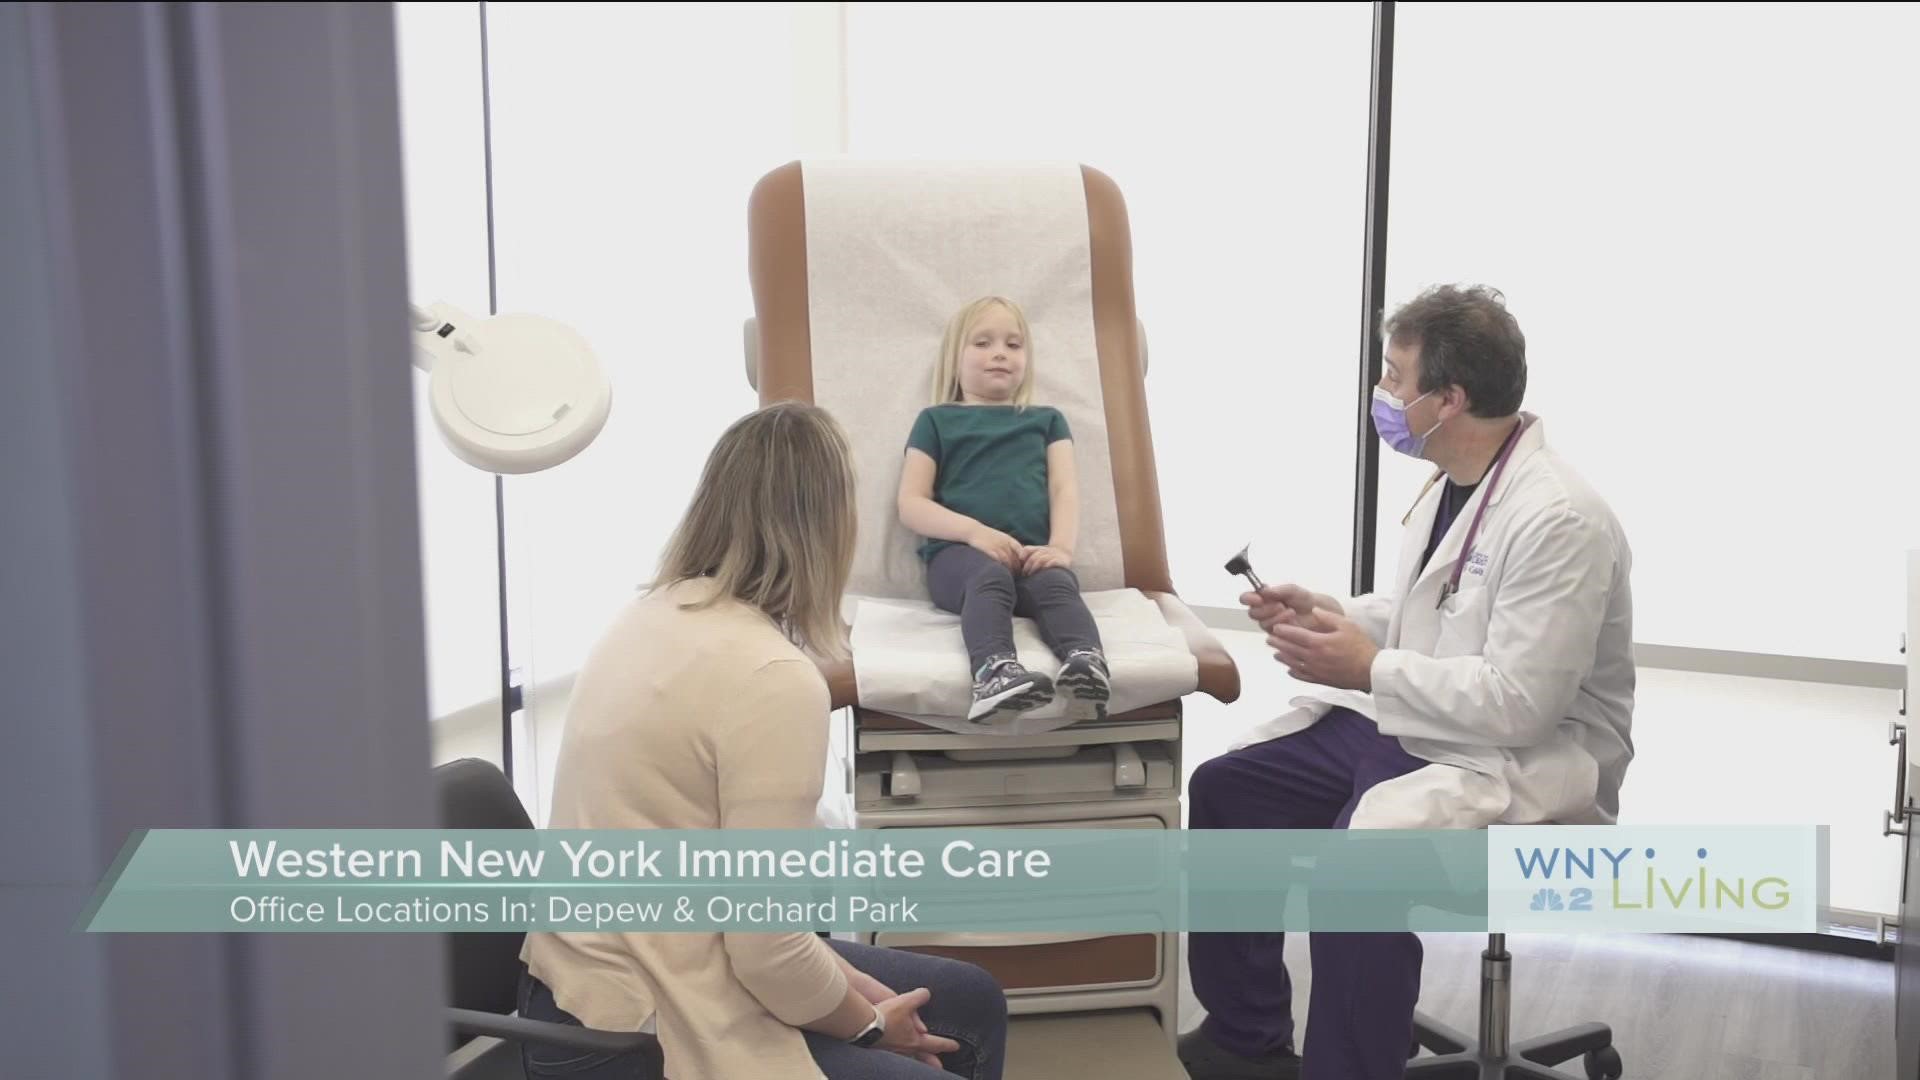 WNY Living - October 1 - Western New York Immediate Care (THIS VIDEO IS SPONSORED BY WESTERN NEW YORK IMMEDIATE CARE)